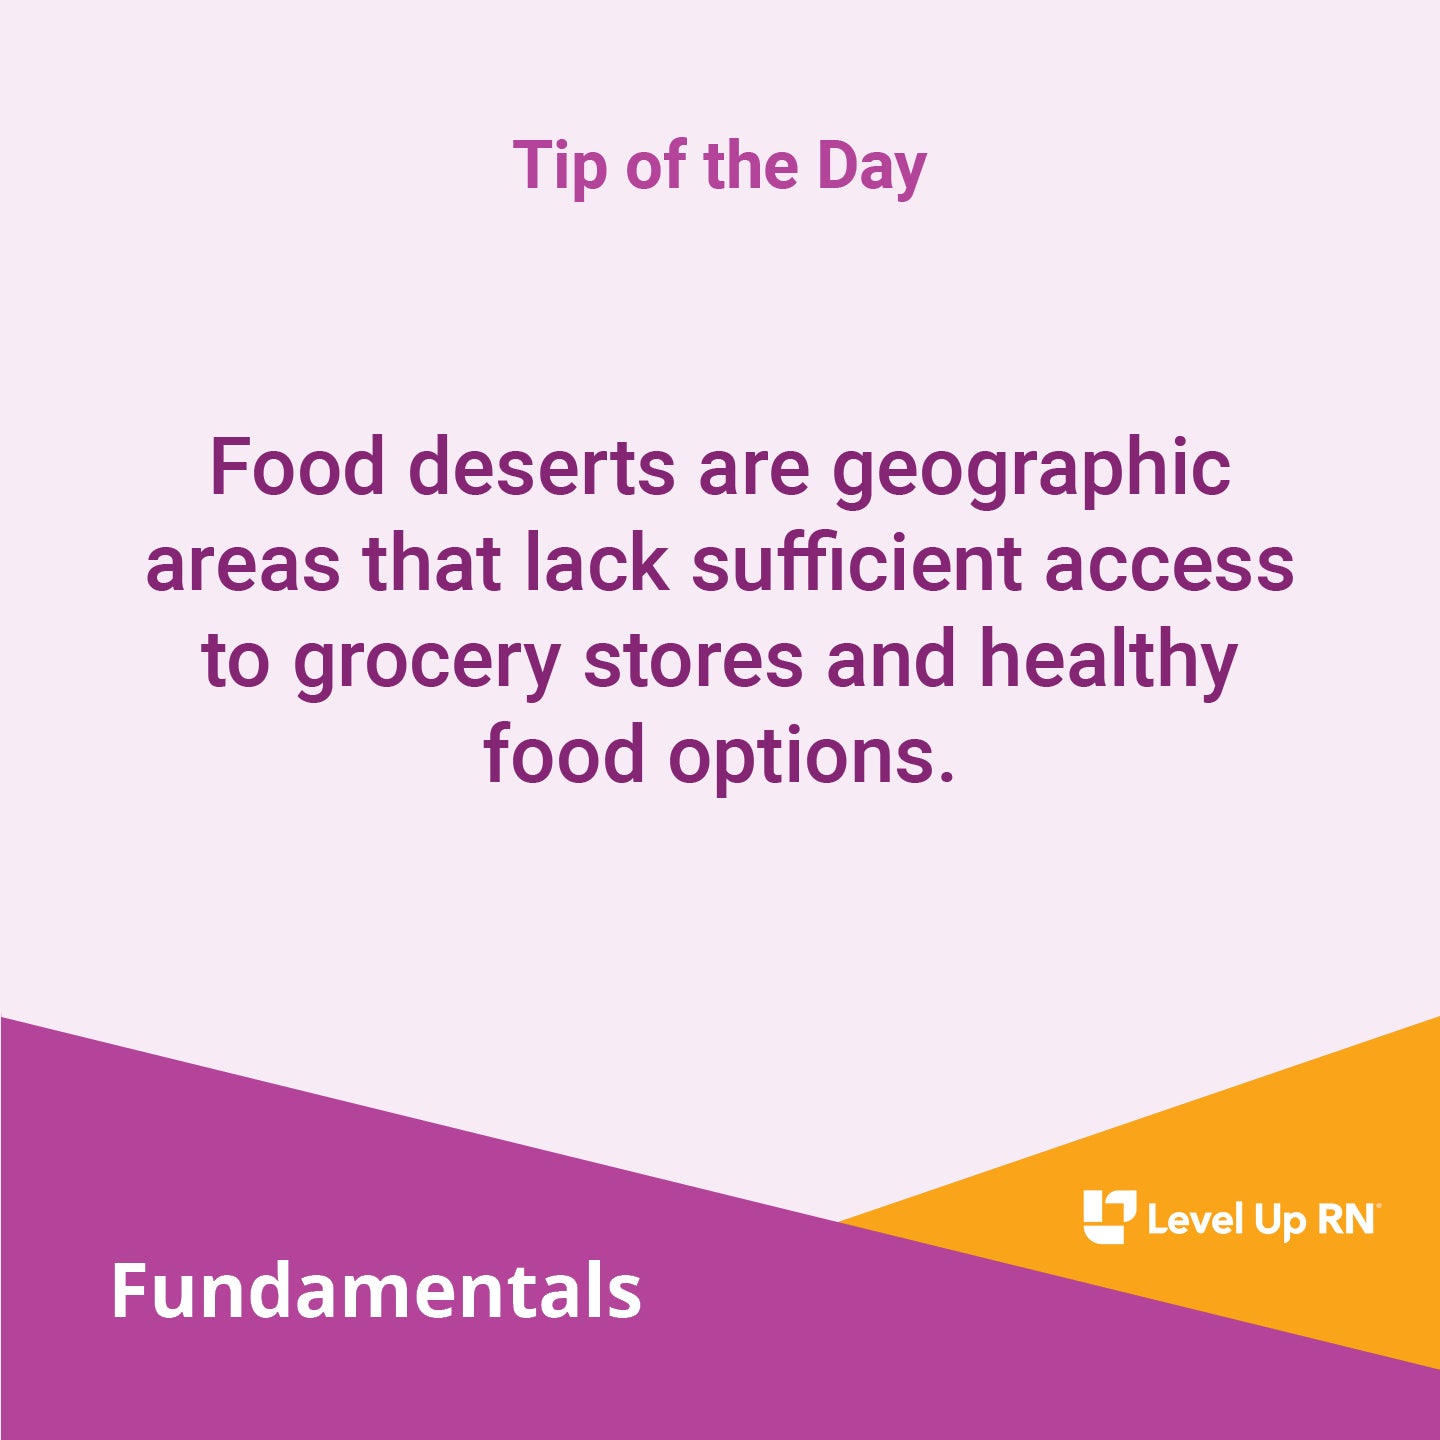 Food deserts are geographic areas that lack sufficient access to grocery stores and healthy food options.